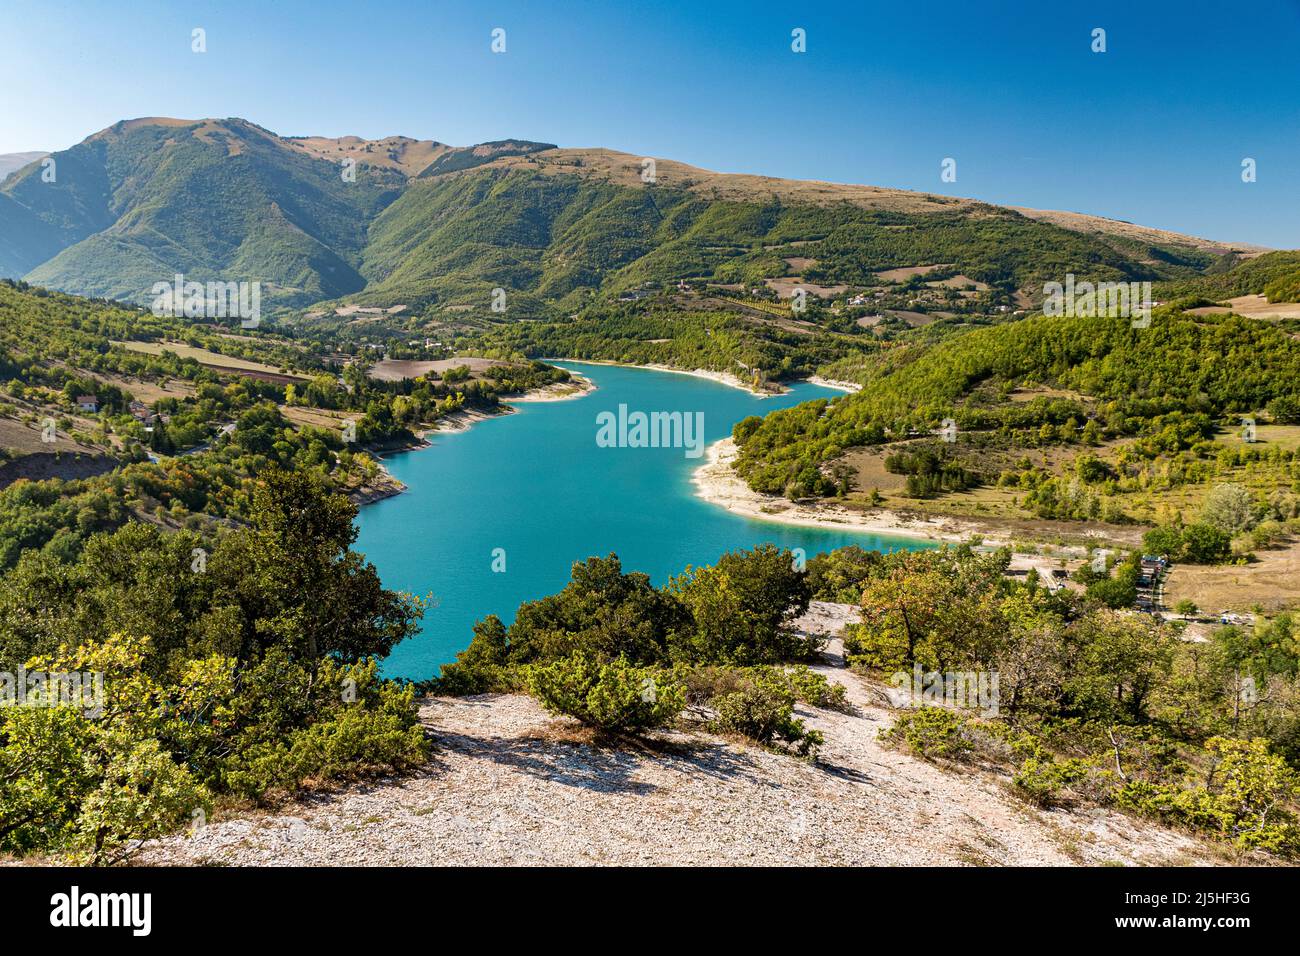 Aerial view of lake Fiastra in Sibillini mountains. Marche, Italy. Stock Photo